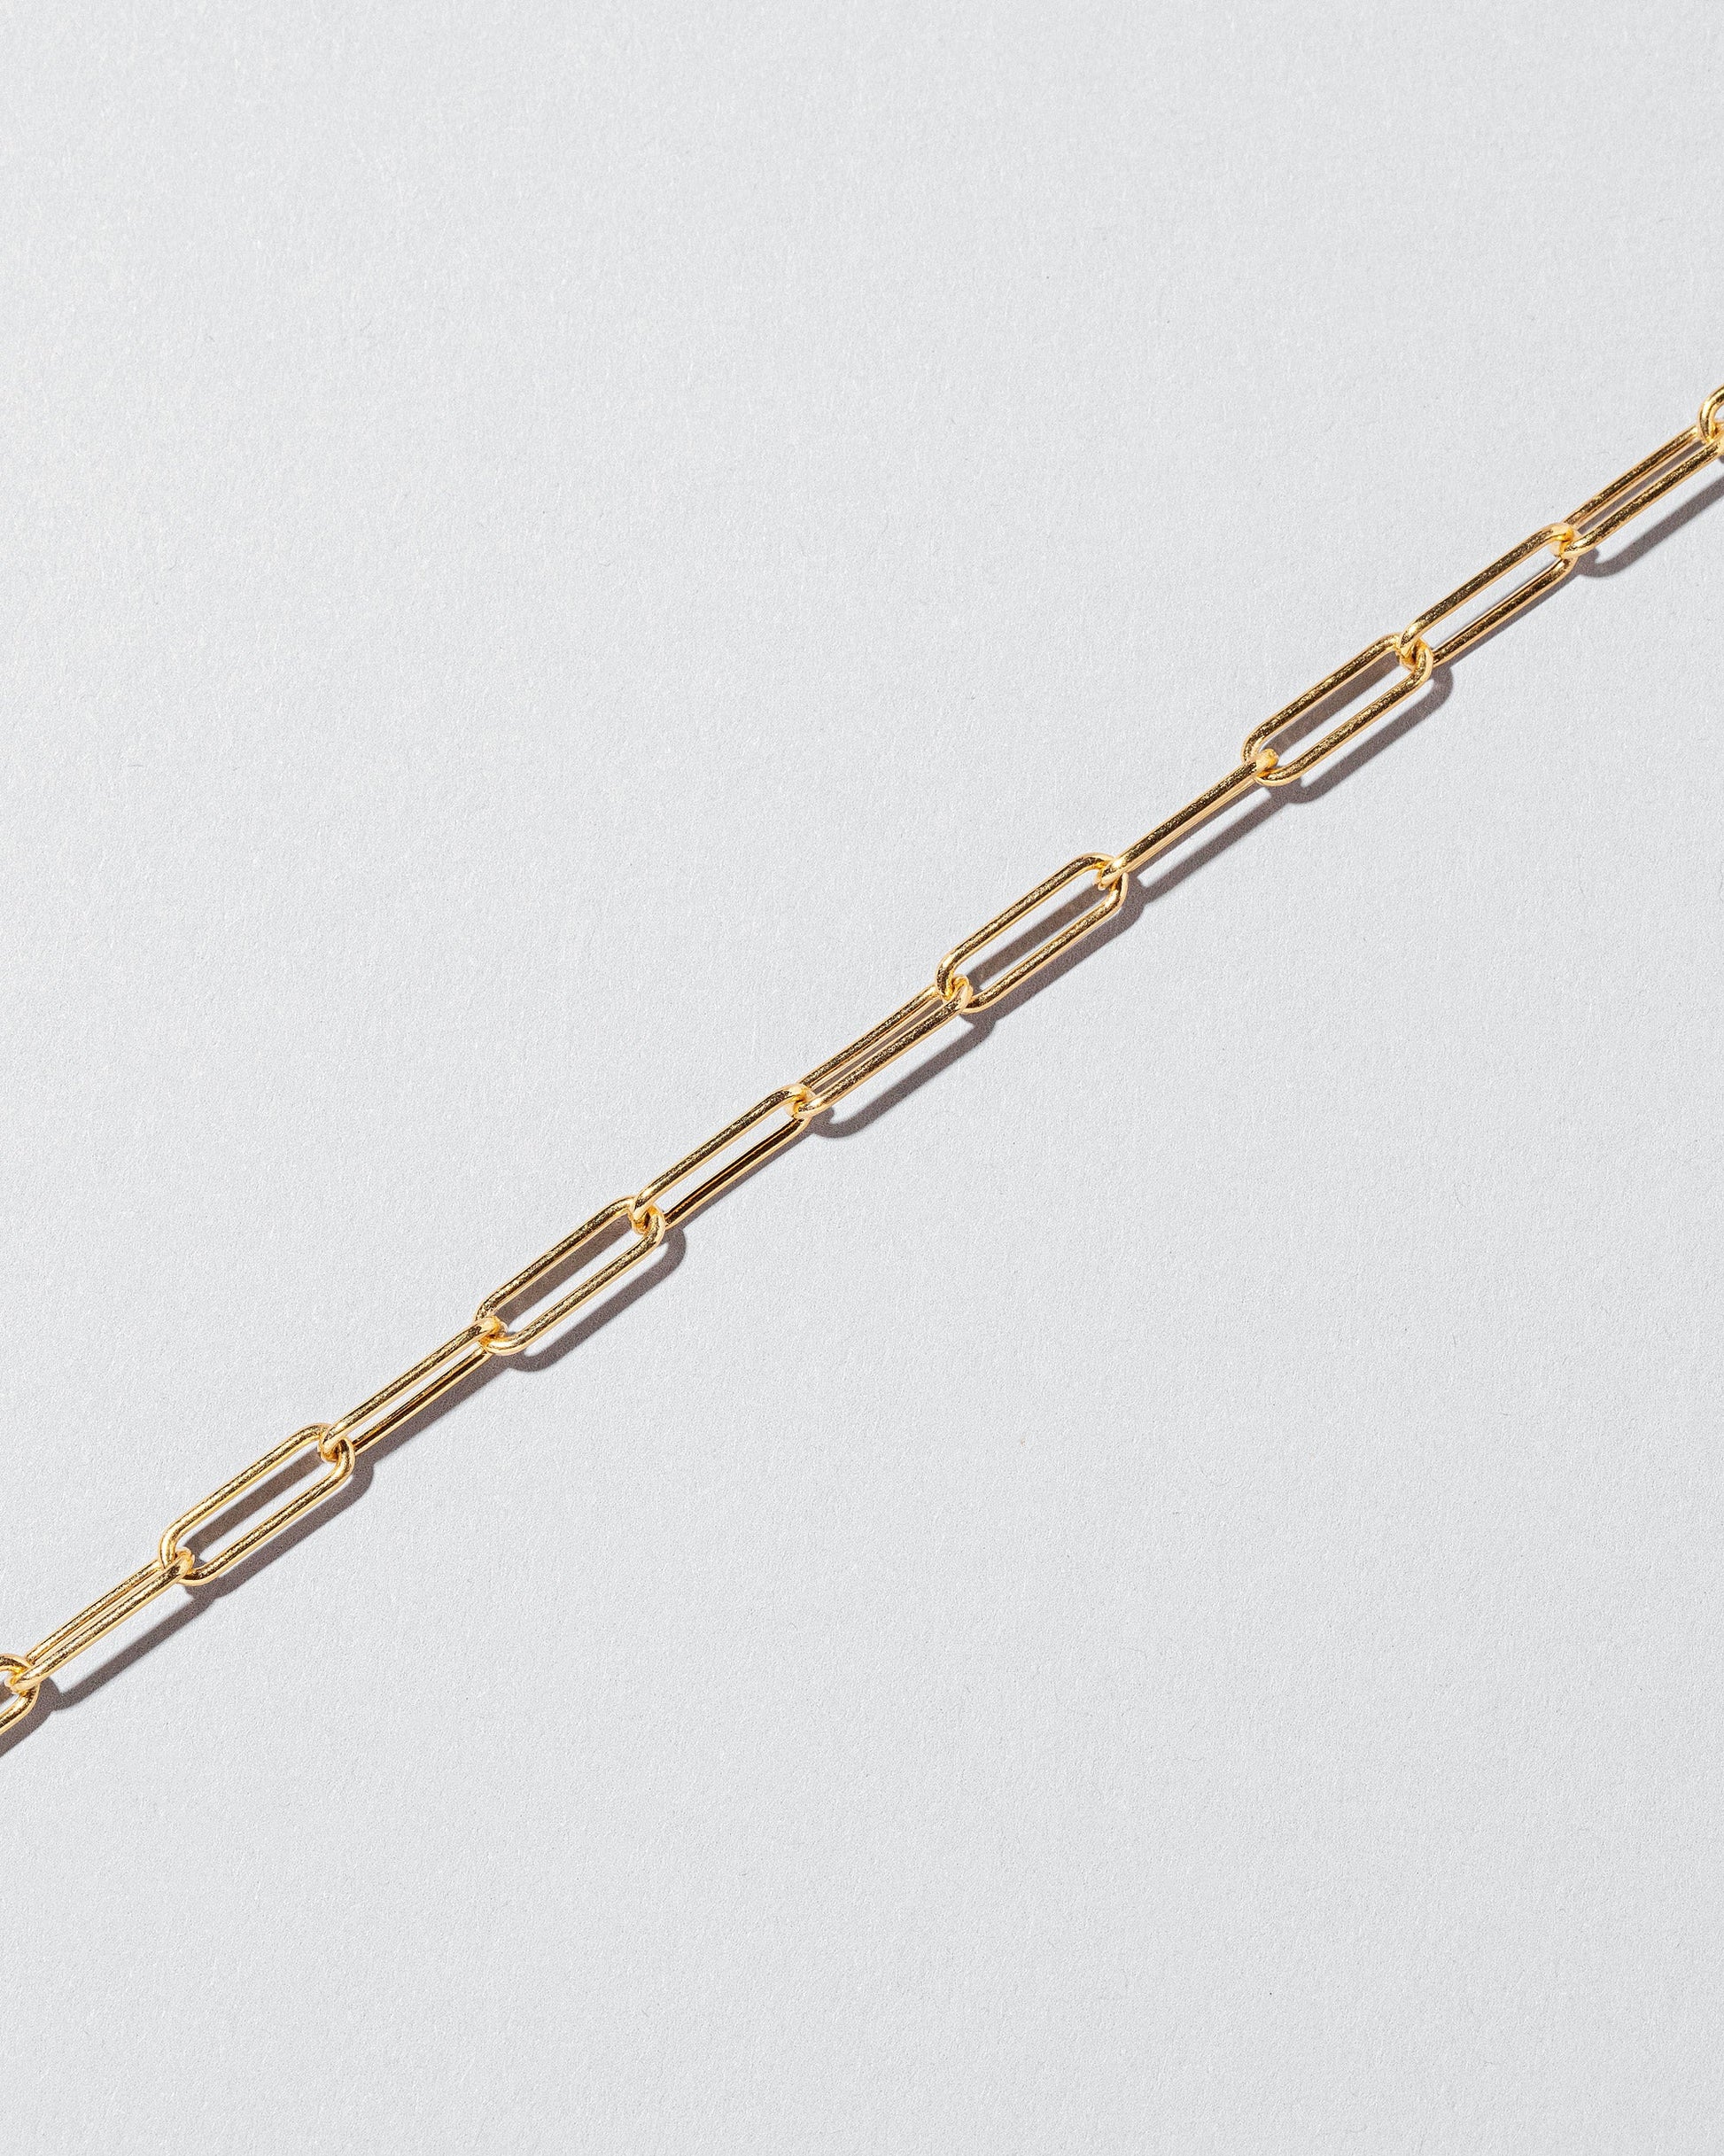  Long Oval Chain Necklace on light color background.